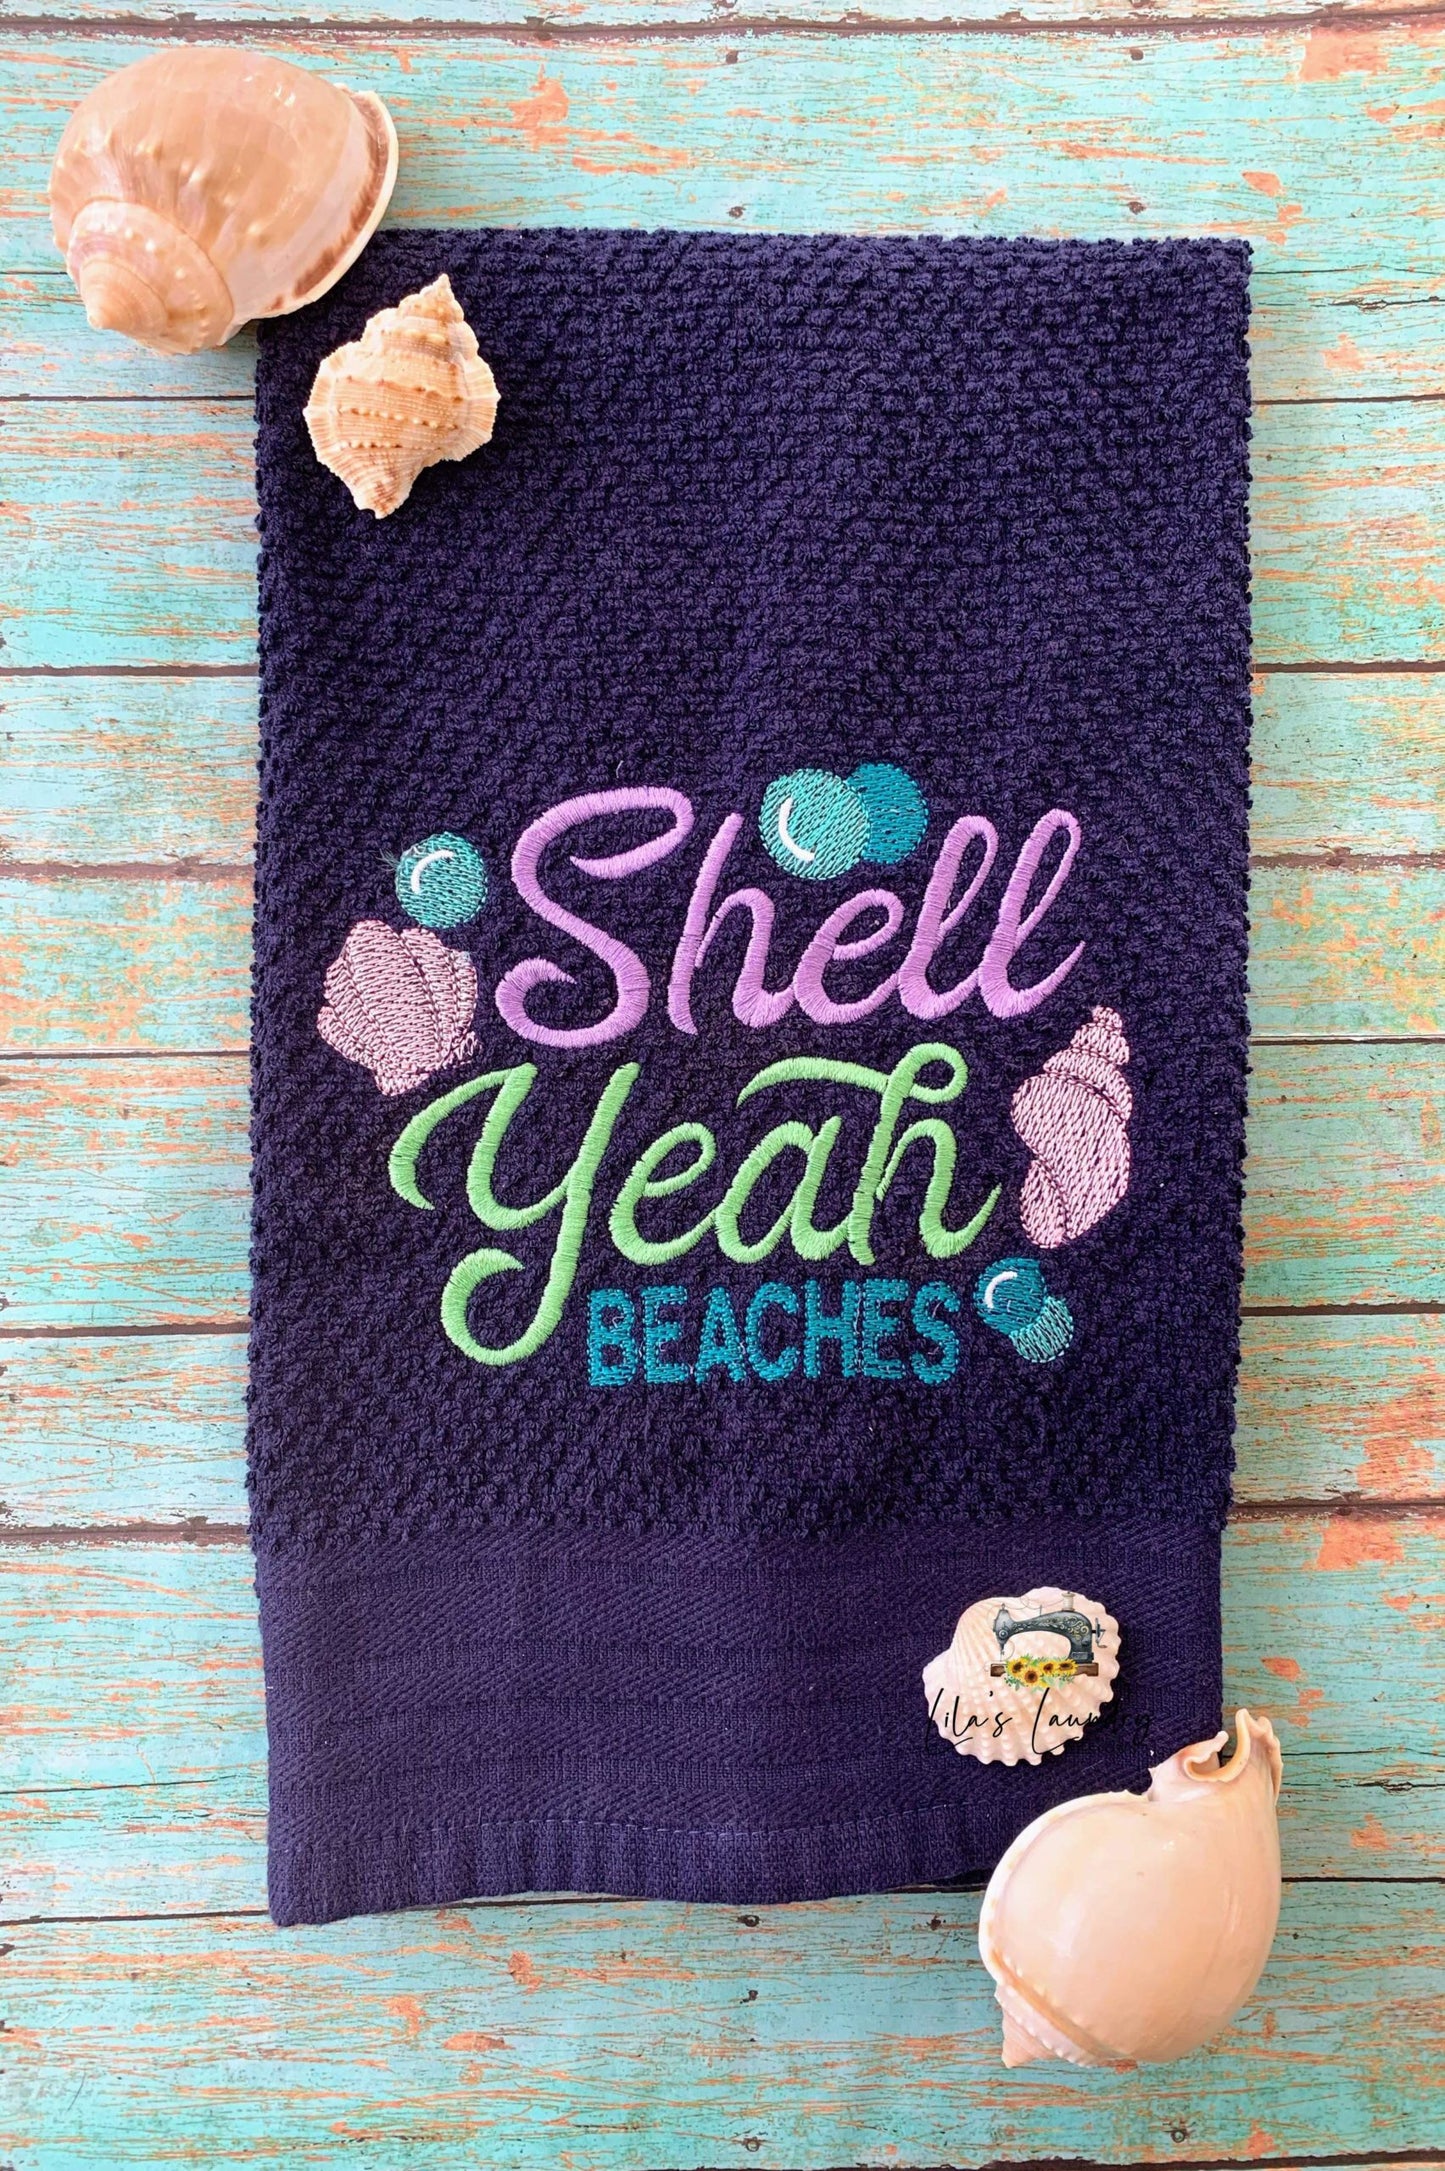 Shell Yeah Beaches - 2 sizes- Digital Embroidery Design